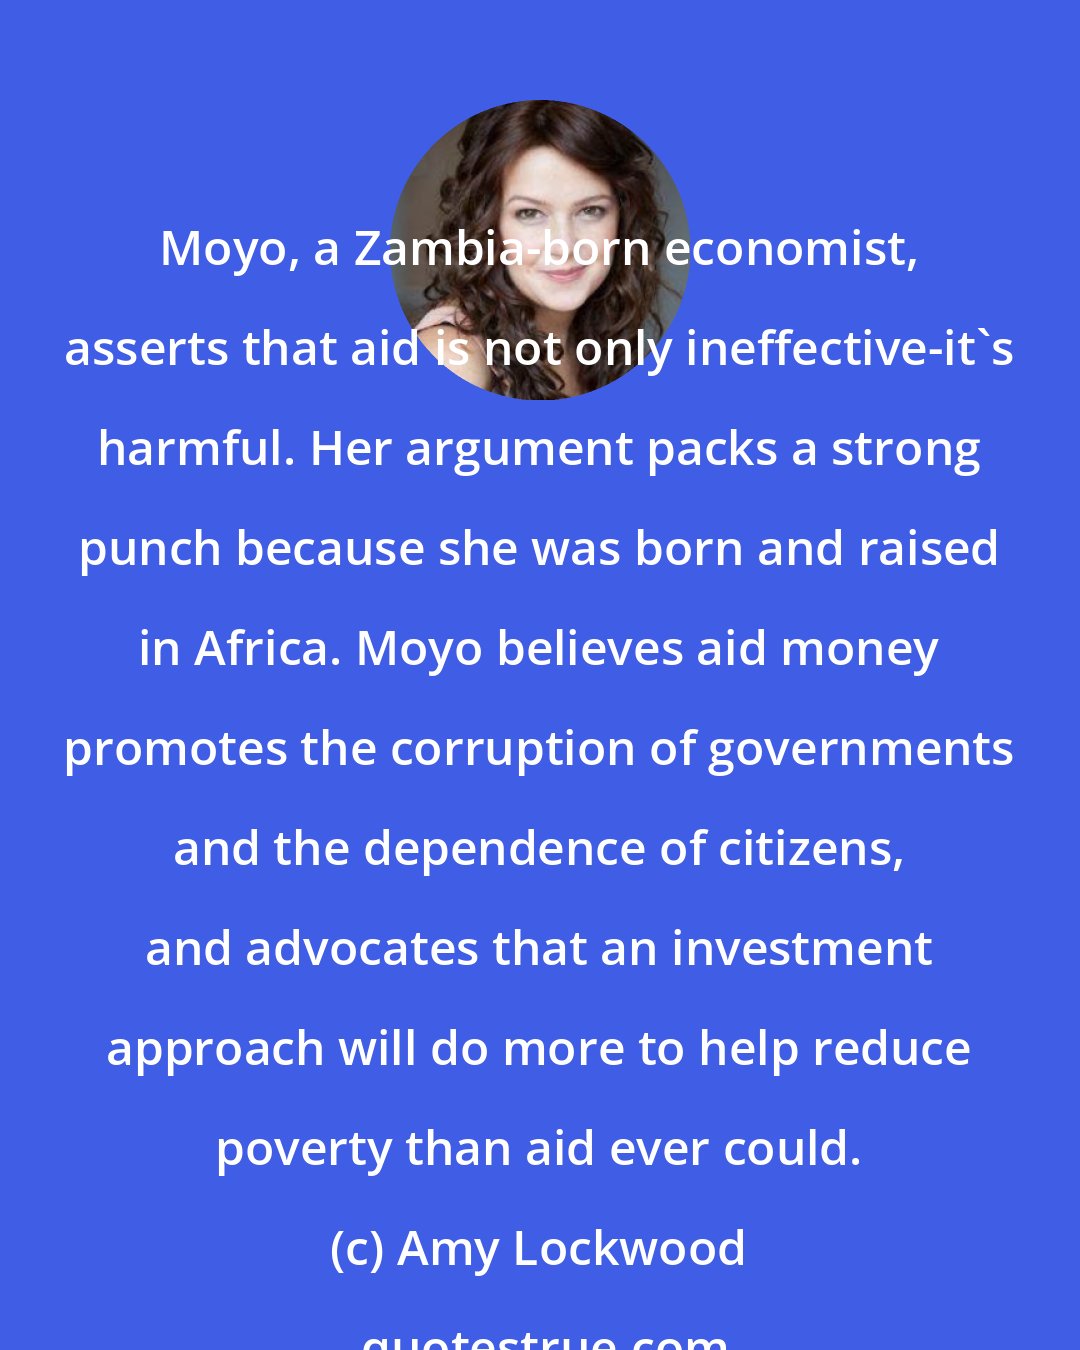 Amy Lockwood: Moyo, a Zambia-born economist, asserts that aid is not only ineffective-it's harmful. Her argument packs a strong punch because she was born and raised in Africa. Moyo believes aid money promotes the corruption of governments and the dependence of citizens, and advocates that an investment approach will do more to help reduce poverty than aid ever could.